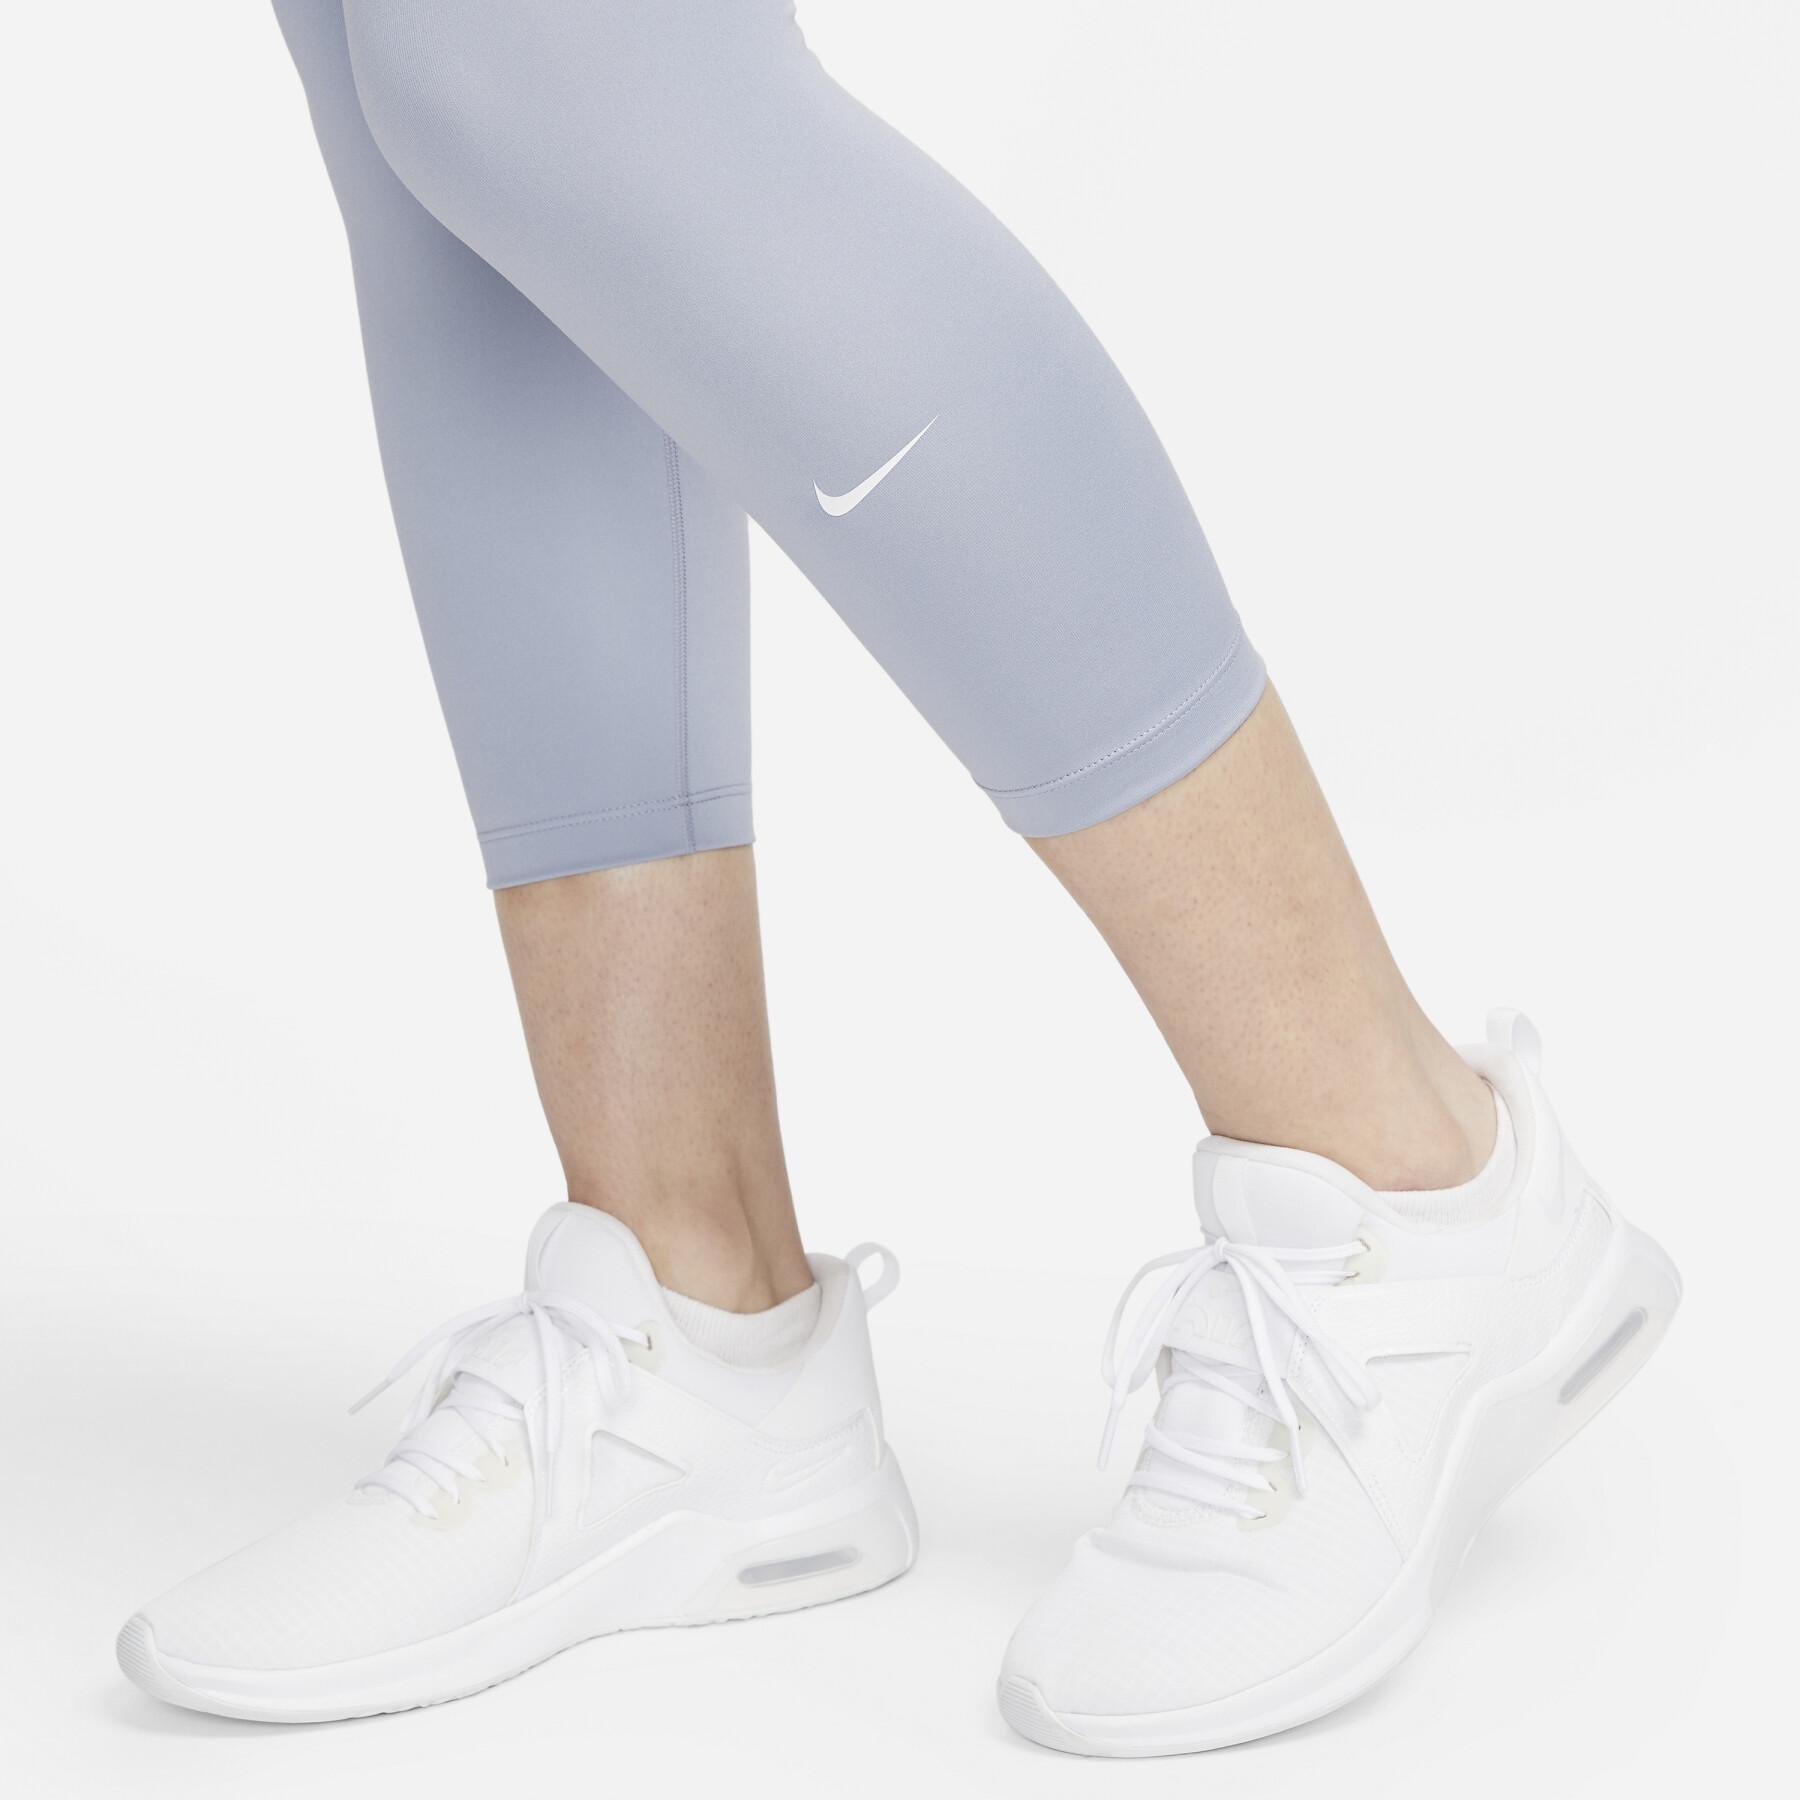 Legging court hoge taille vrouw Nike One Dri-FIT